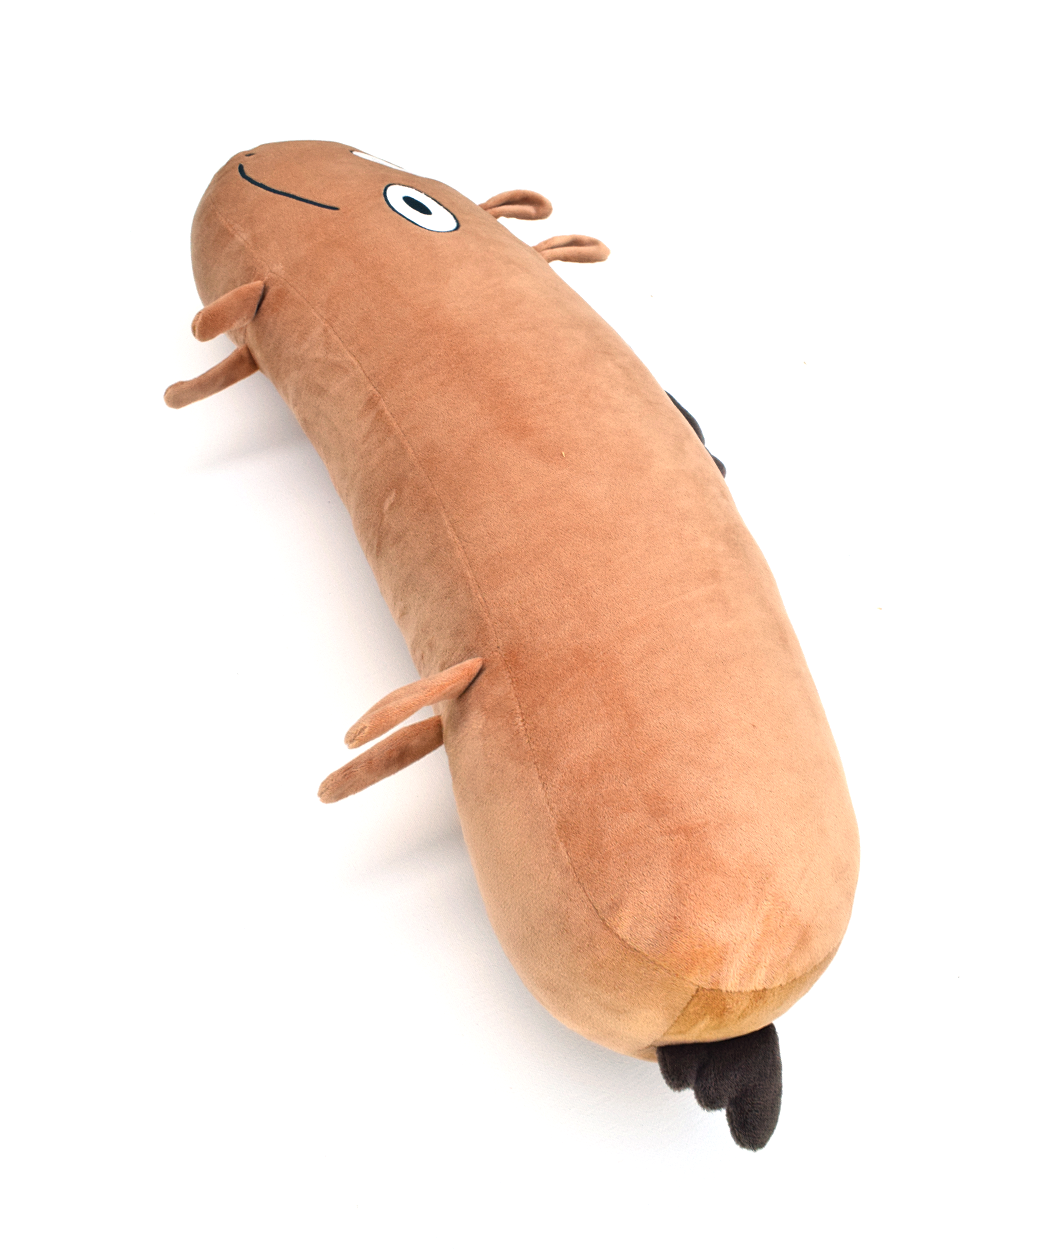 The Jacob Horse plushie is an oblong light brown horse with a crooked smile and eyes on one side of its body. It has little legs, ears and a mane and tail. 